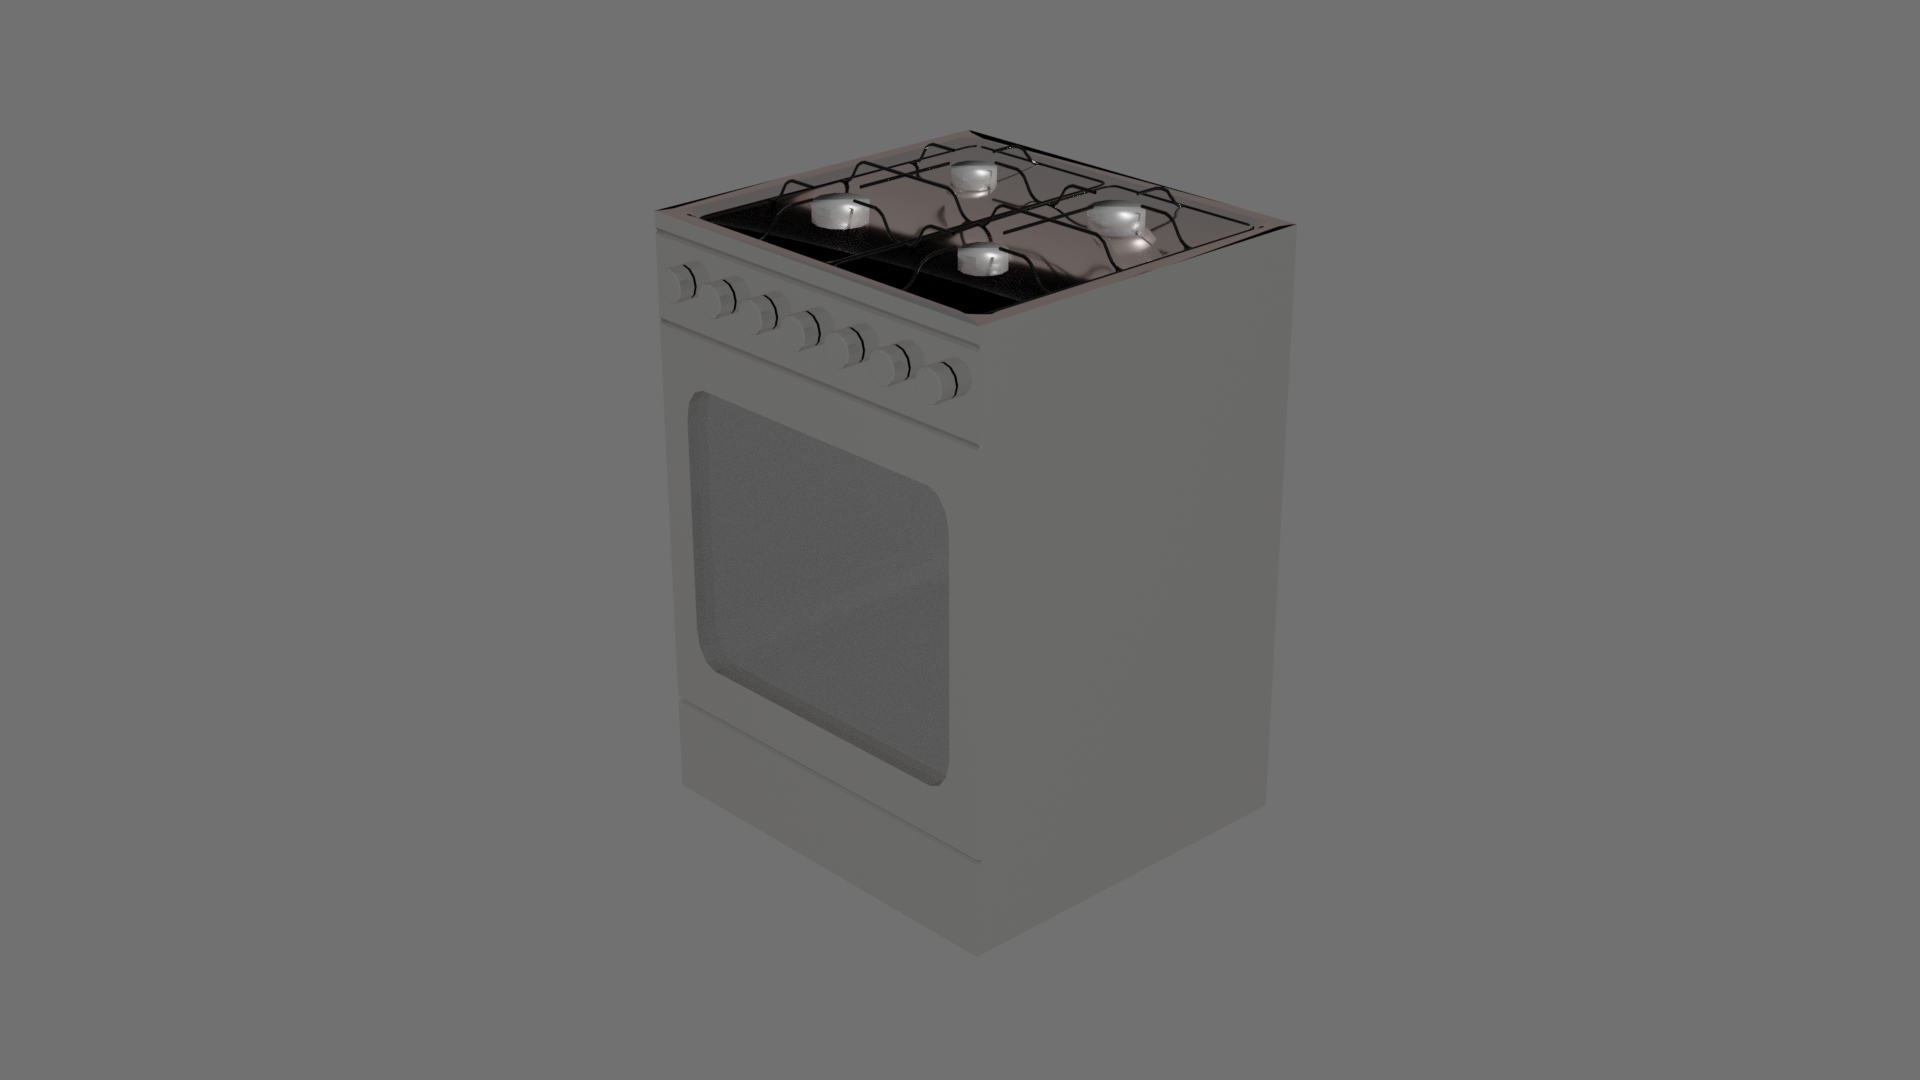 Gas stove preview image 1